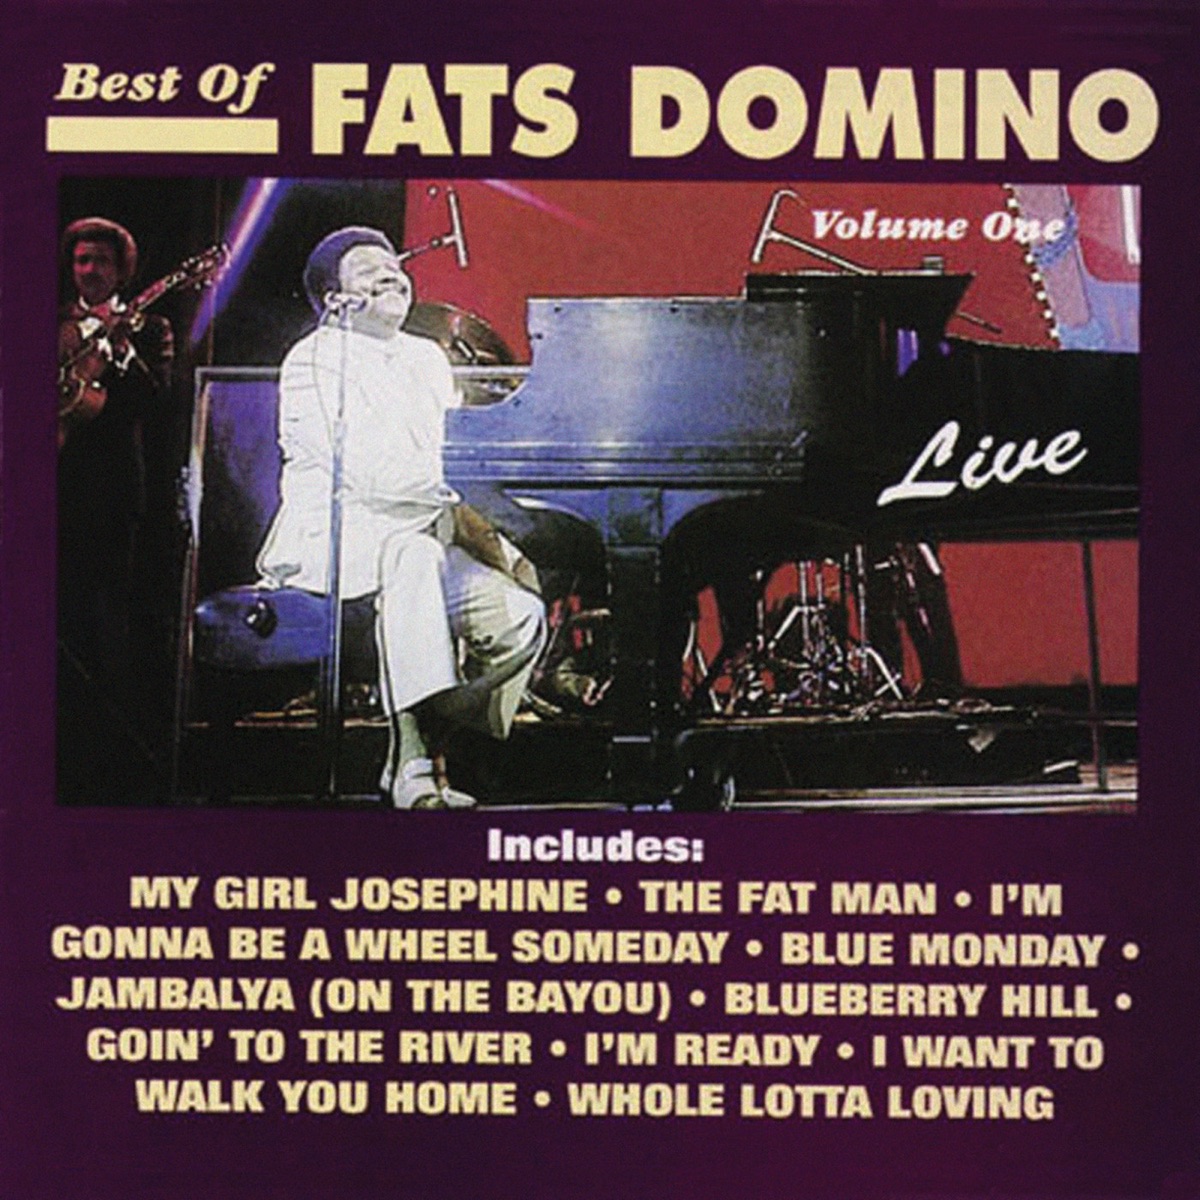 The Fats Domino Jukebox: 20 Greatest Hits - Album by Fats Domino - Apple  Music